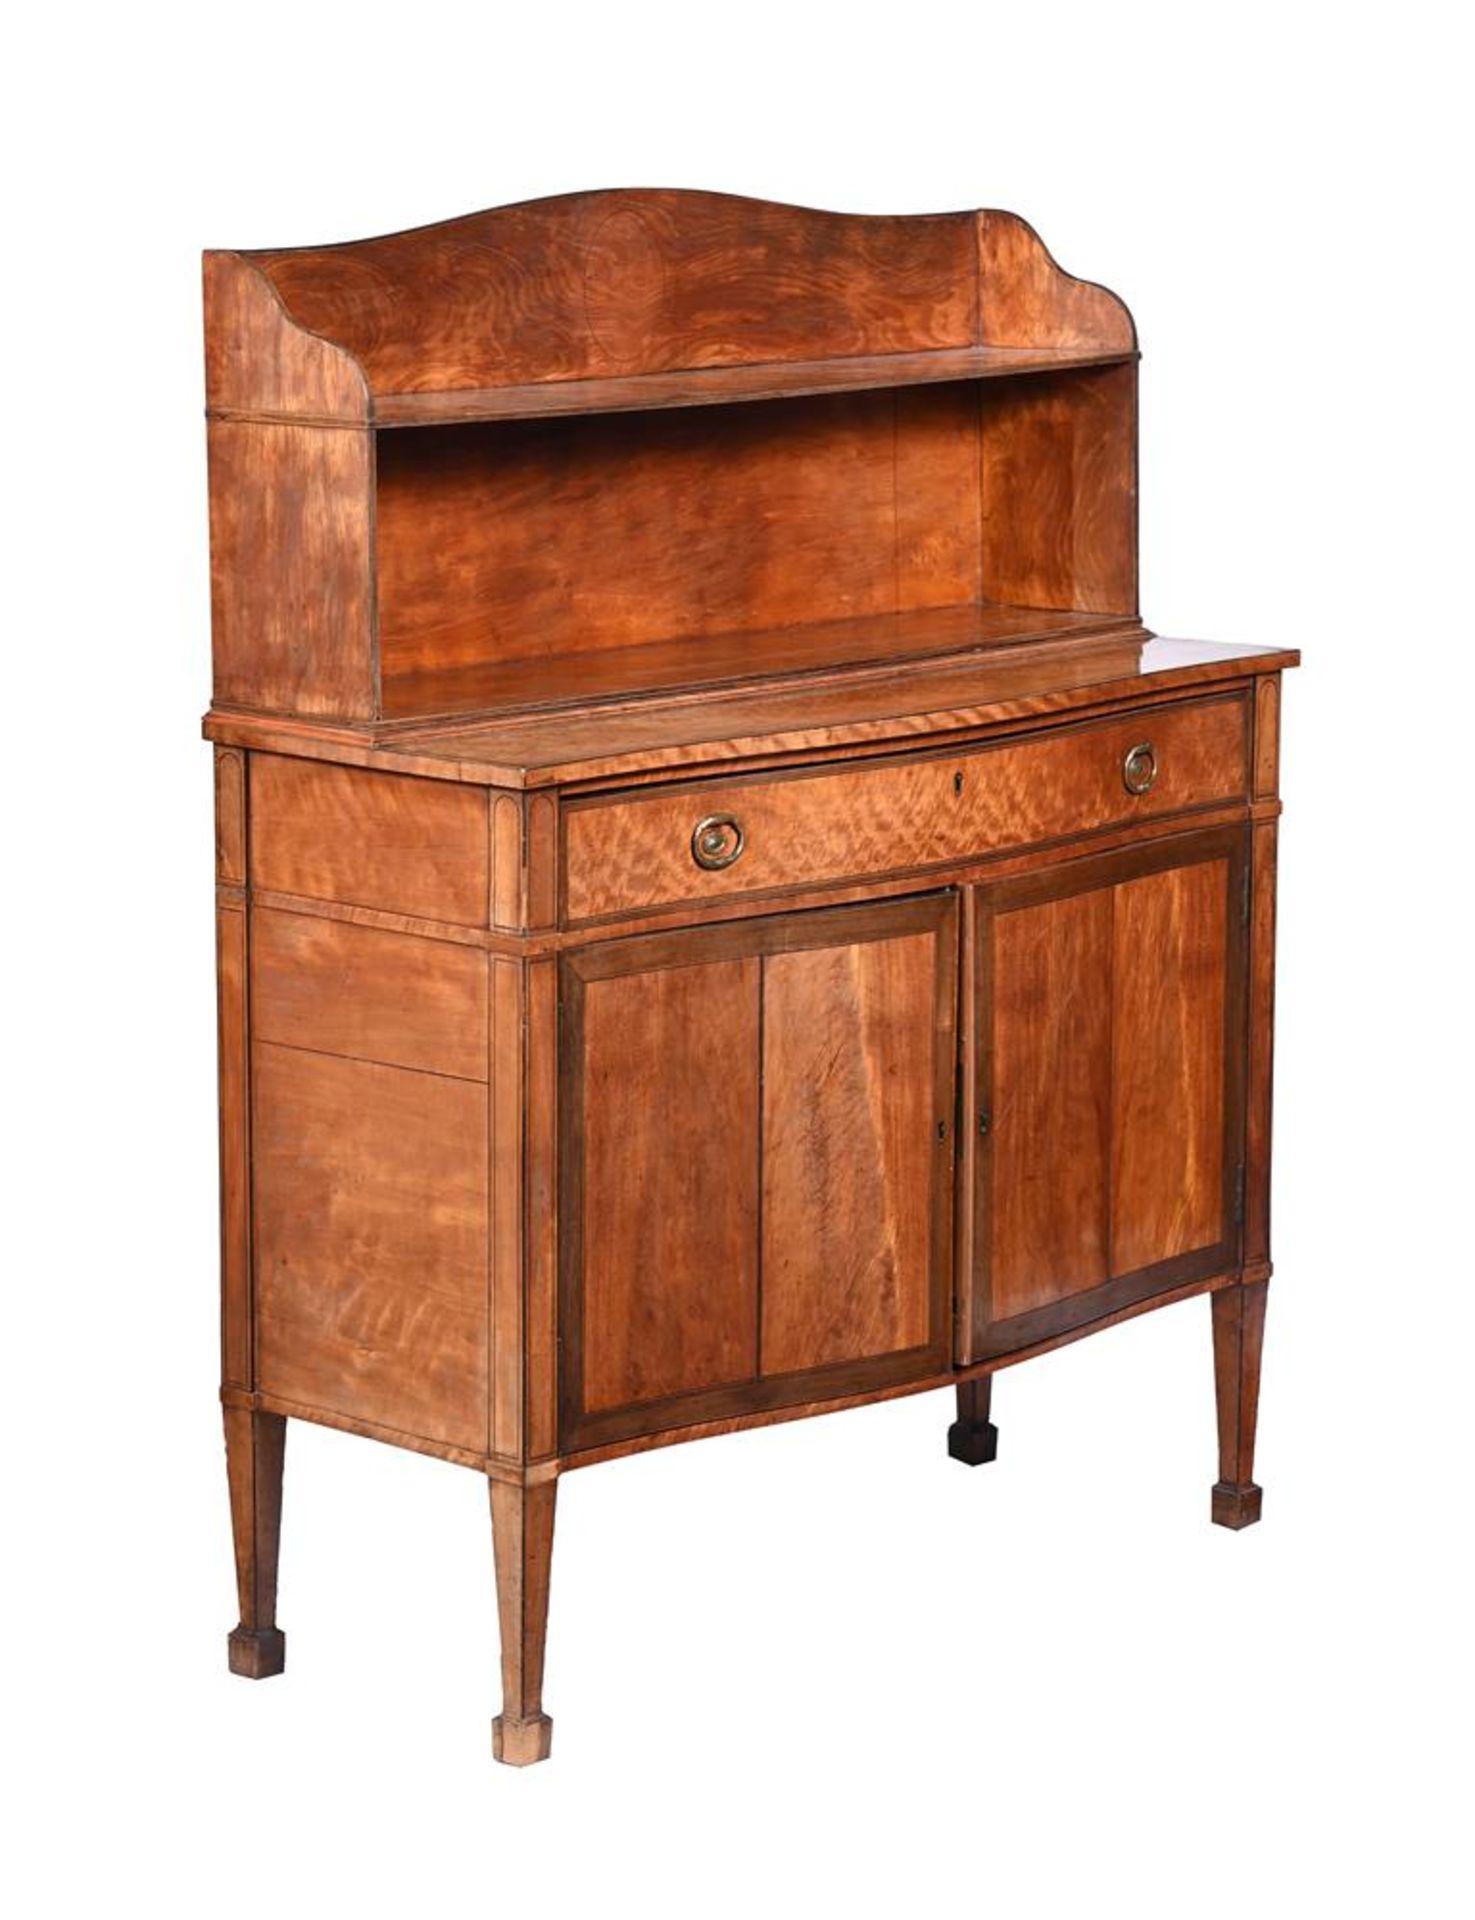 A REGENCY MAHOGANY AND INLAID SIDE CABINET